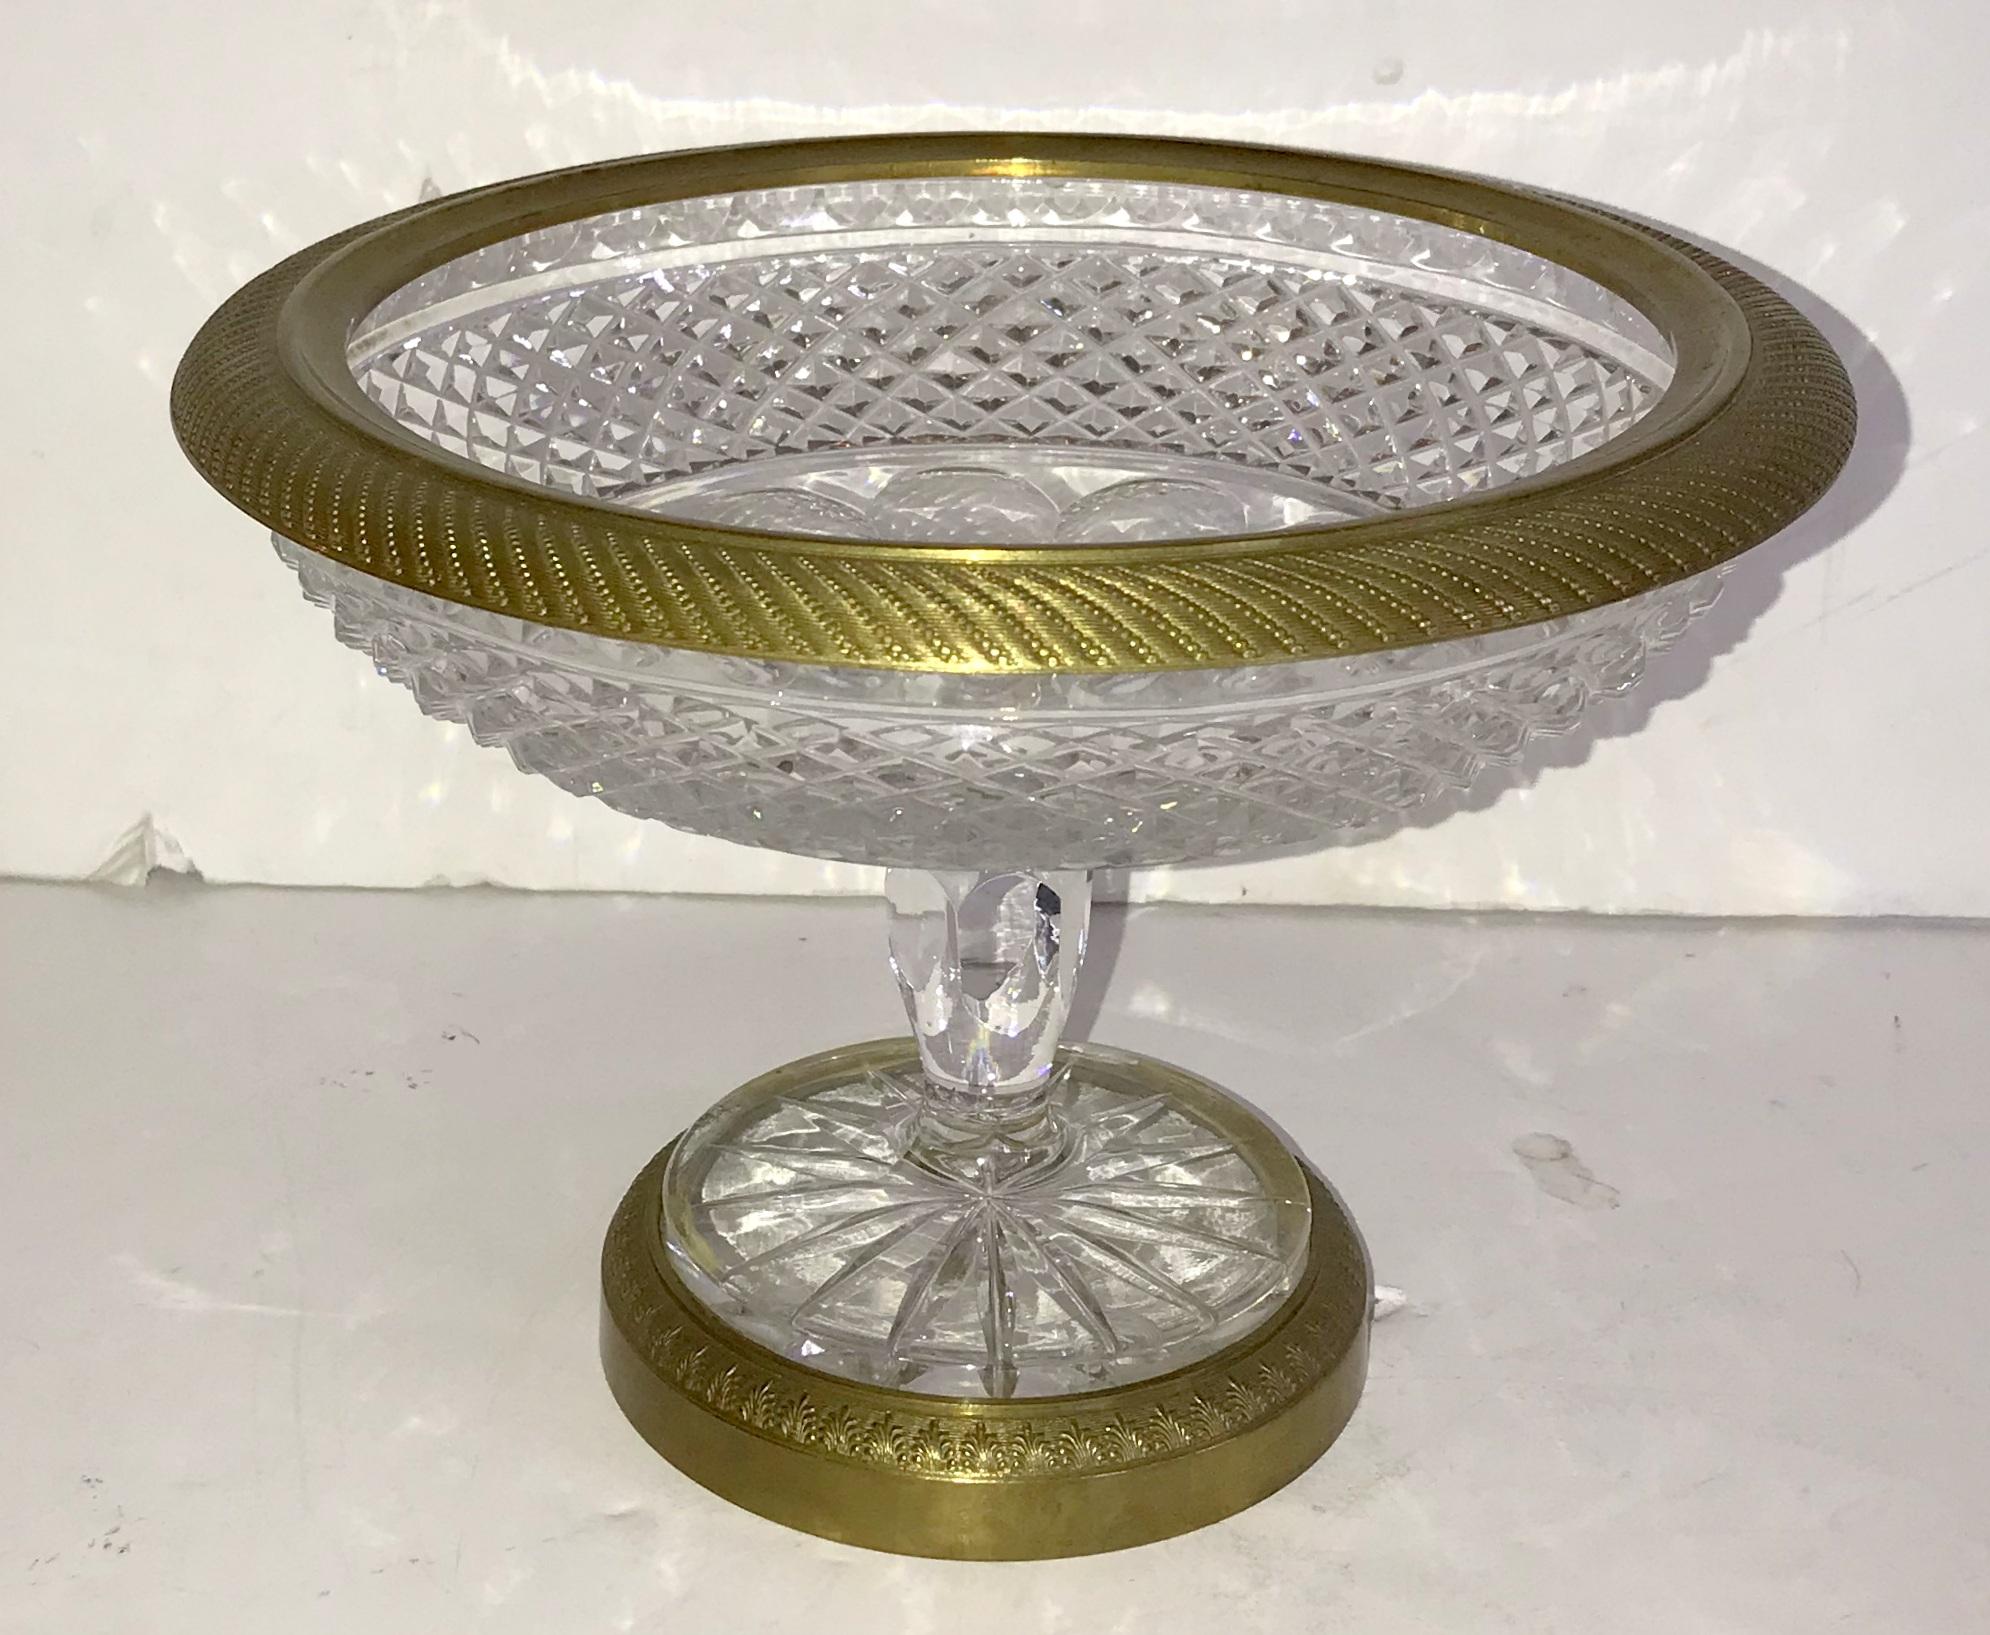 A wonderful French gilt bronze and cut crystal ormolu mounted pedestal bowl in the manner of Baccarat.